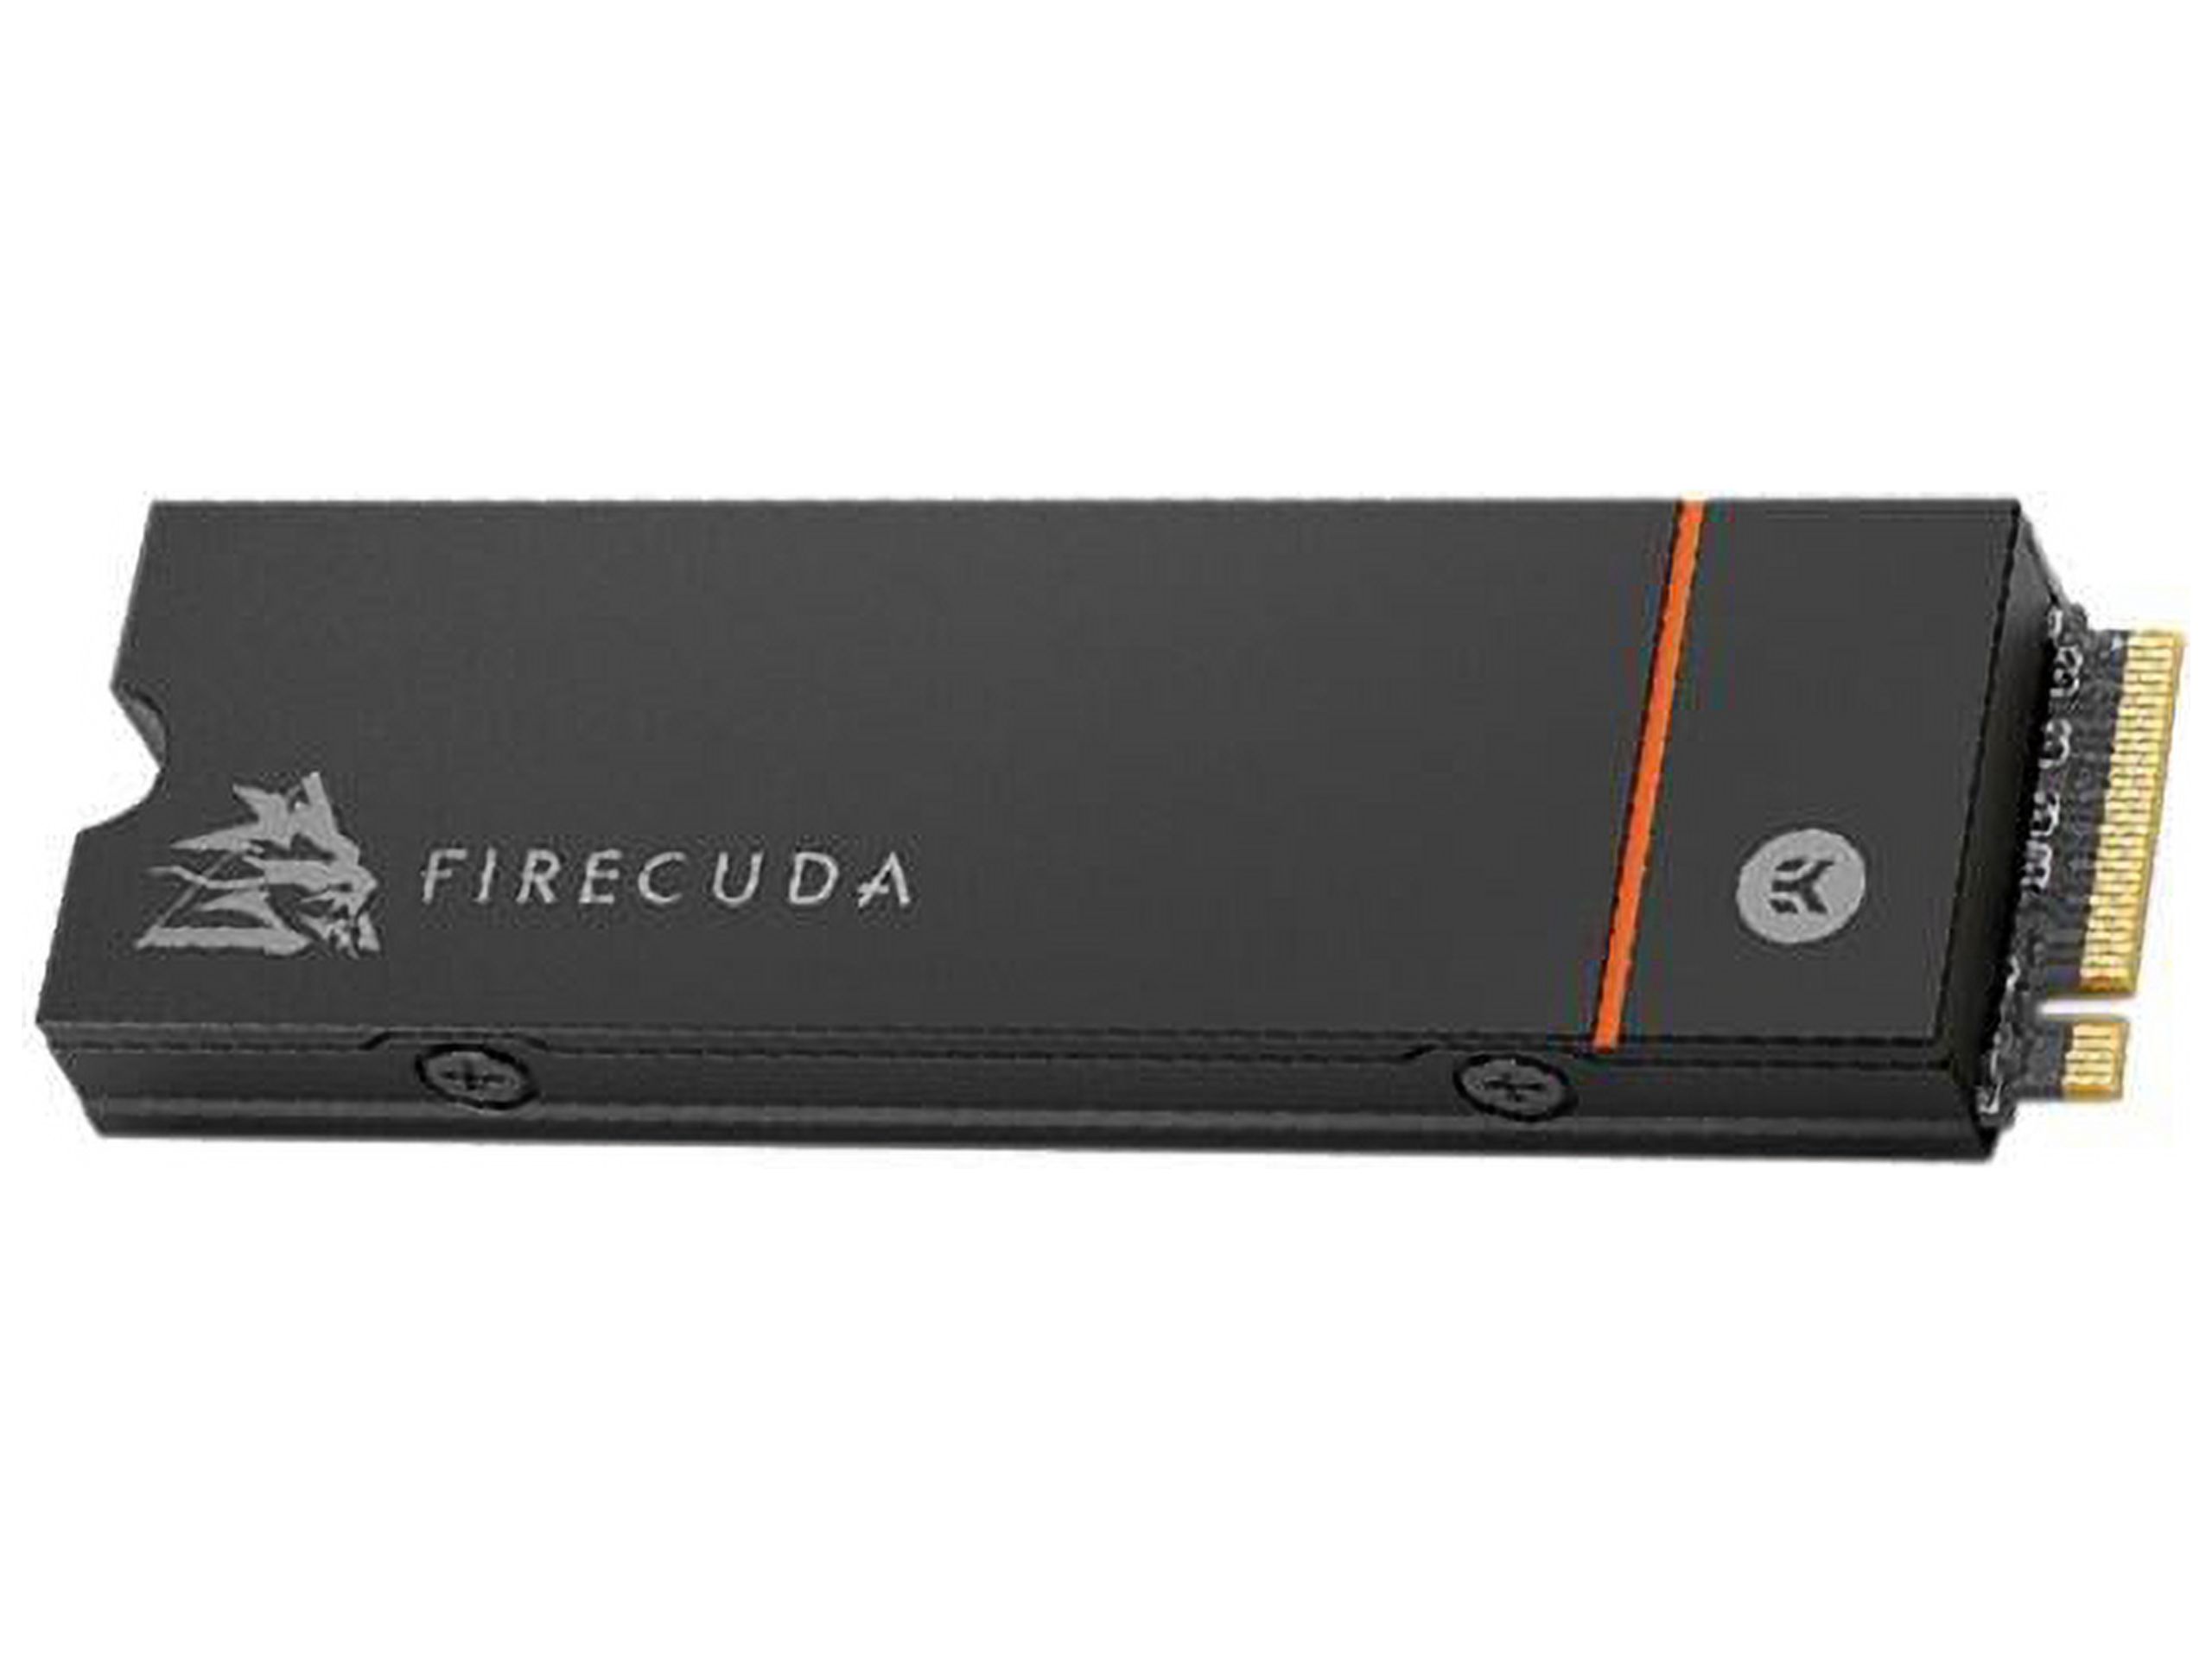 Seagate FireCuda 530 M.2 2280 4TB PCIe Gen4 x4 NVMe 1.4 3D NAND Internal Solid State Drive (SSD) ZP4000GM3A023 - image 4 of 6